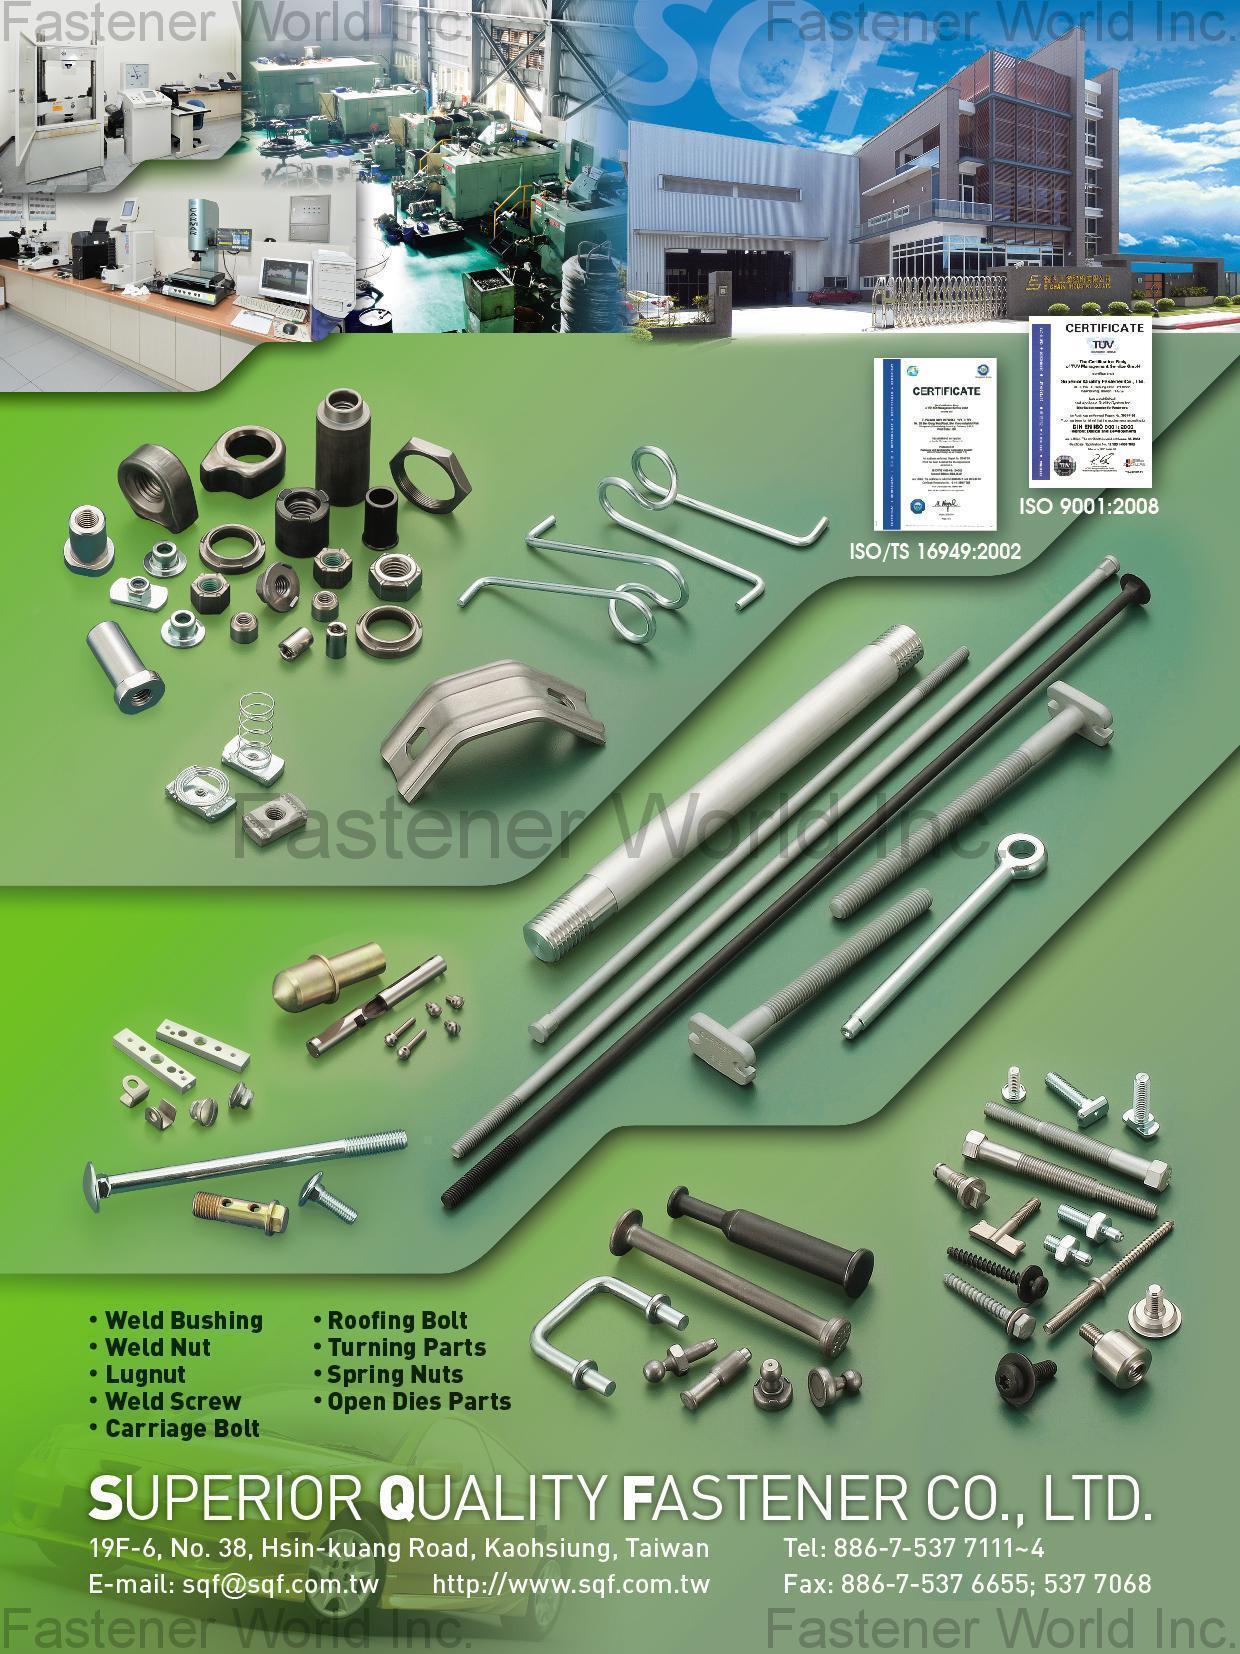 Weld Screws Weld Bushing, Weld Nut, Lug Nut, Weld Screw, Carriage Bolt, Roofing Bolt, Turning Parts, Spring Nuts, Open Dies Parts